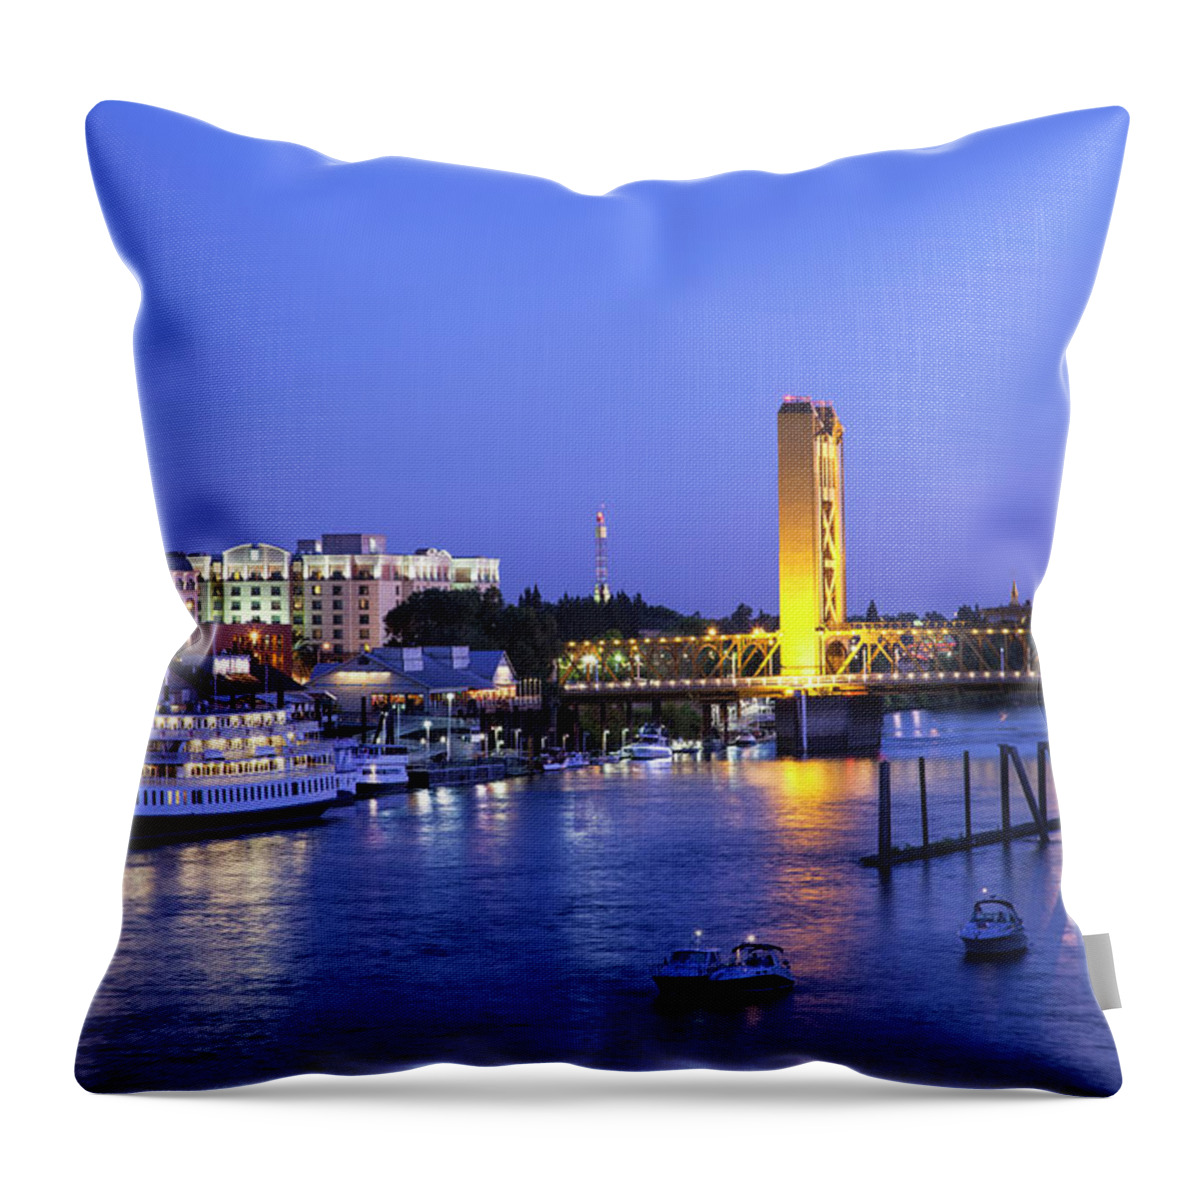 Scenics Throw Pillow featuring the photograph Sacramento River And Tower Bridge At by Picturelake